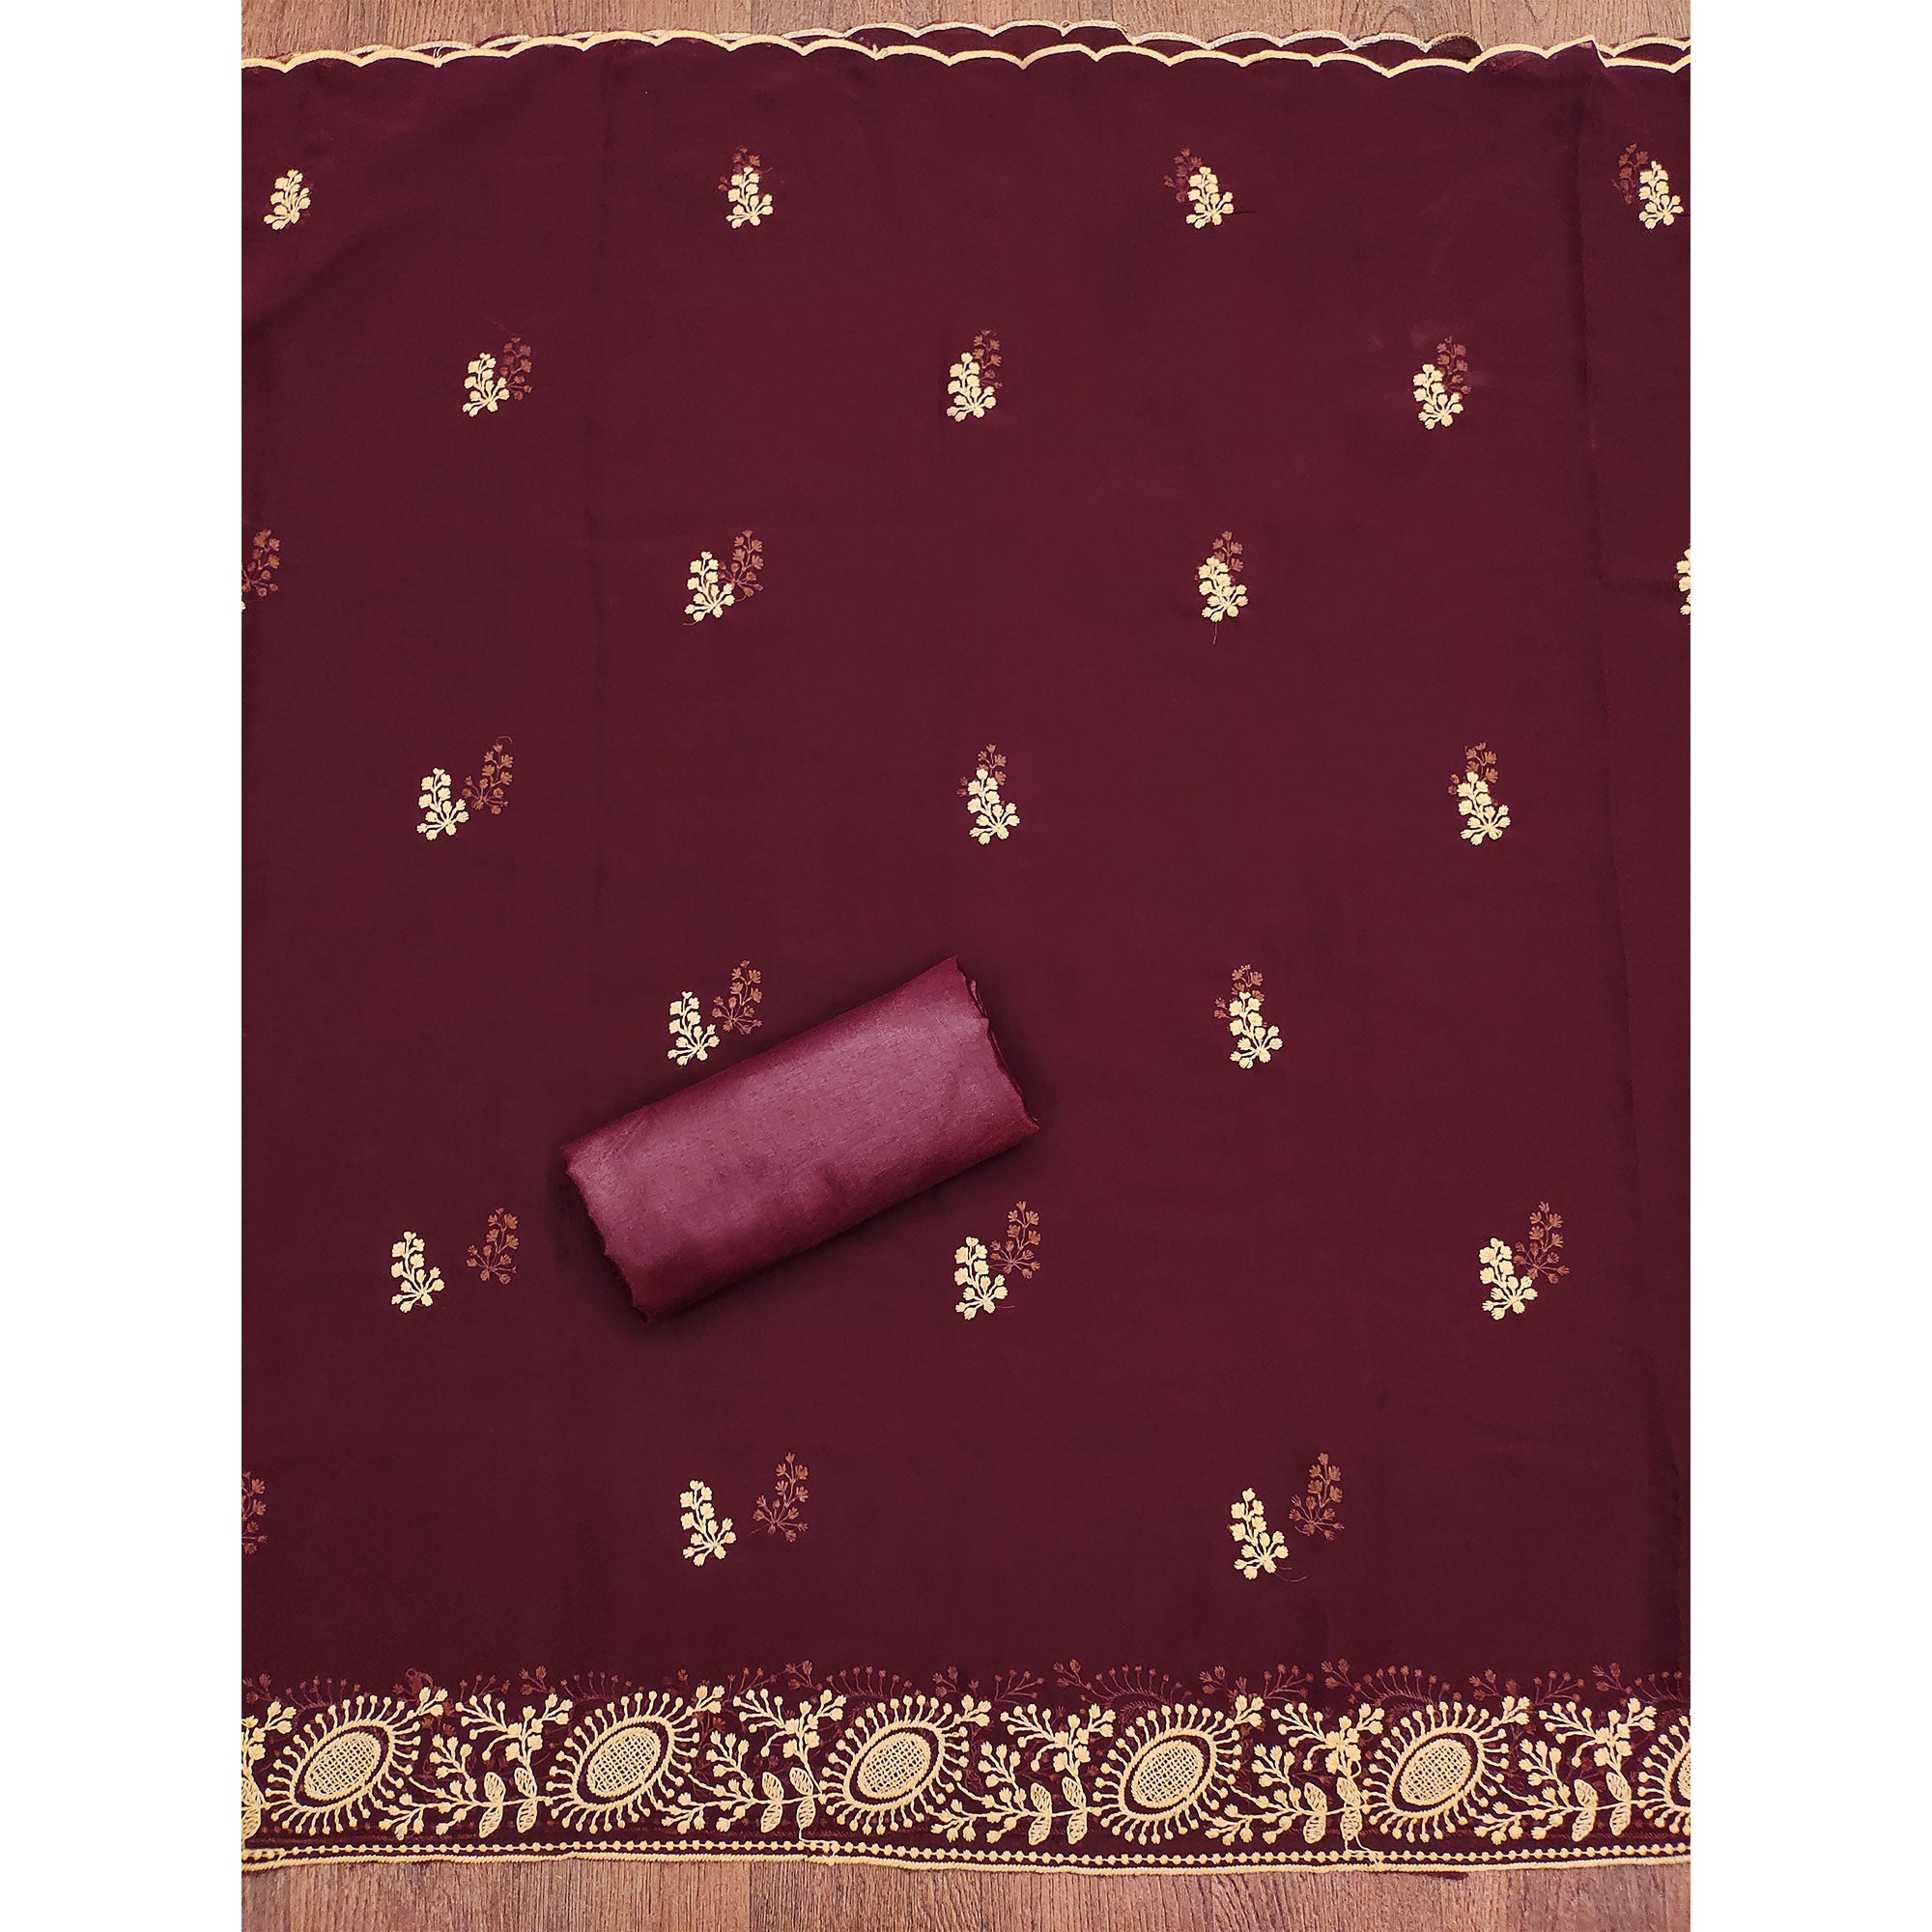 Maroon Floral Embroidered Georgette Dress Material